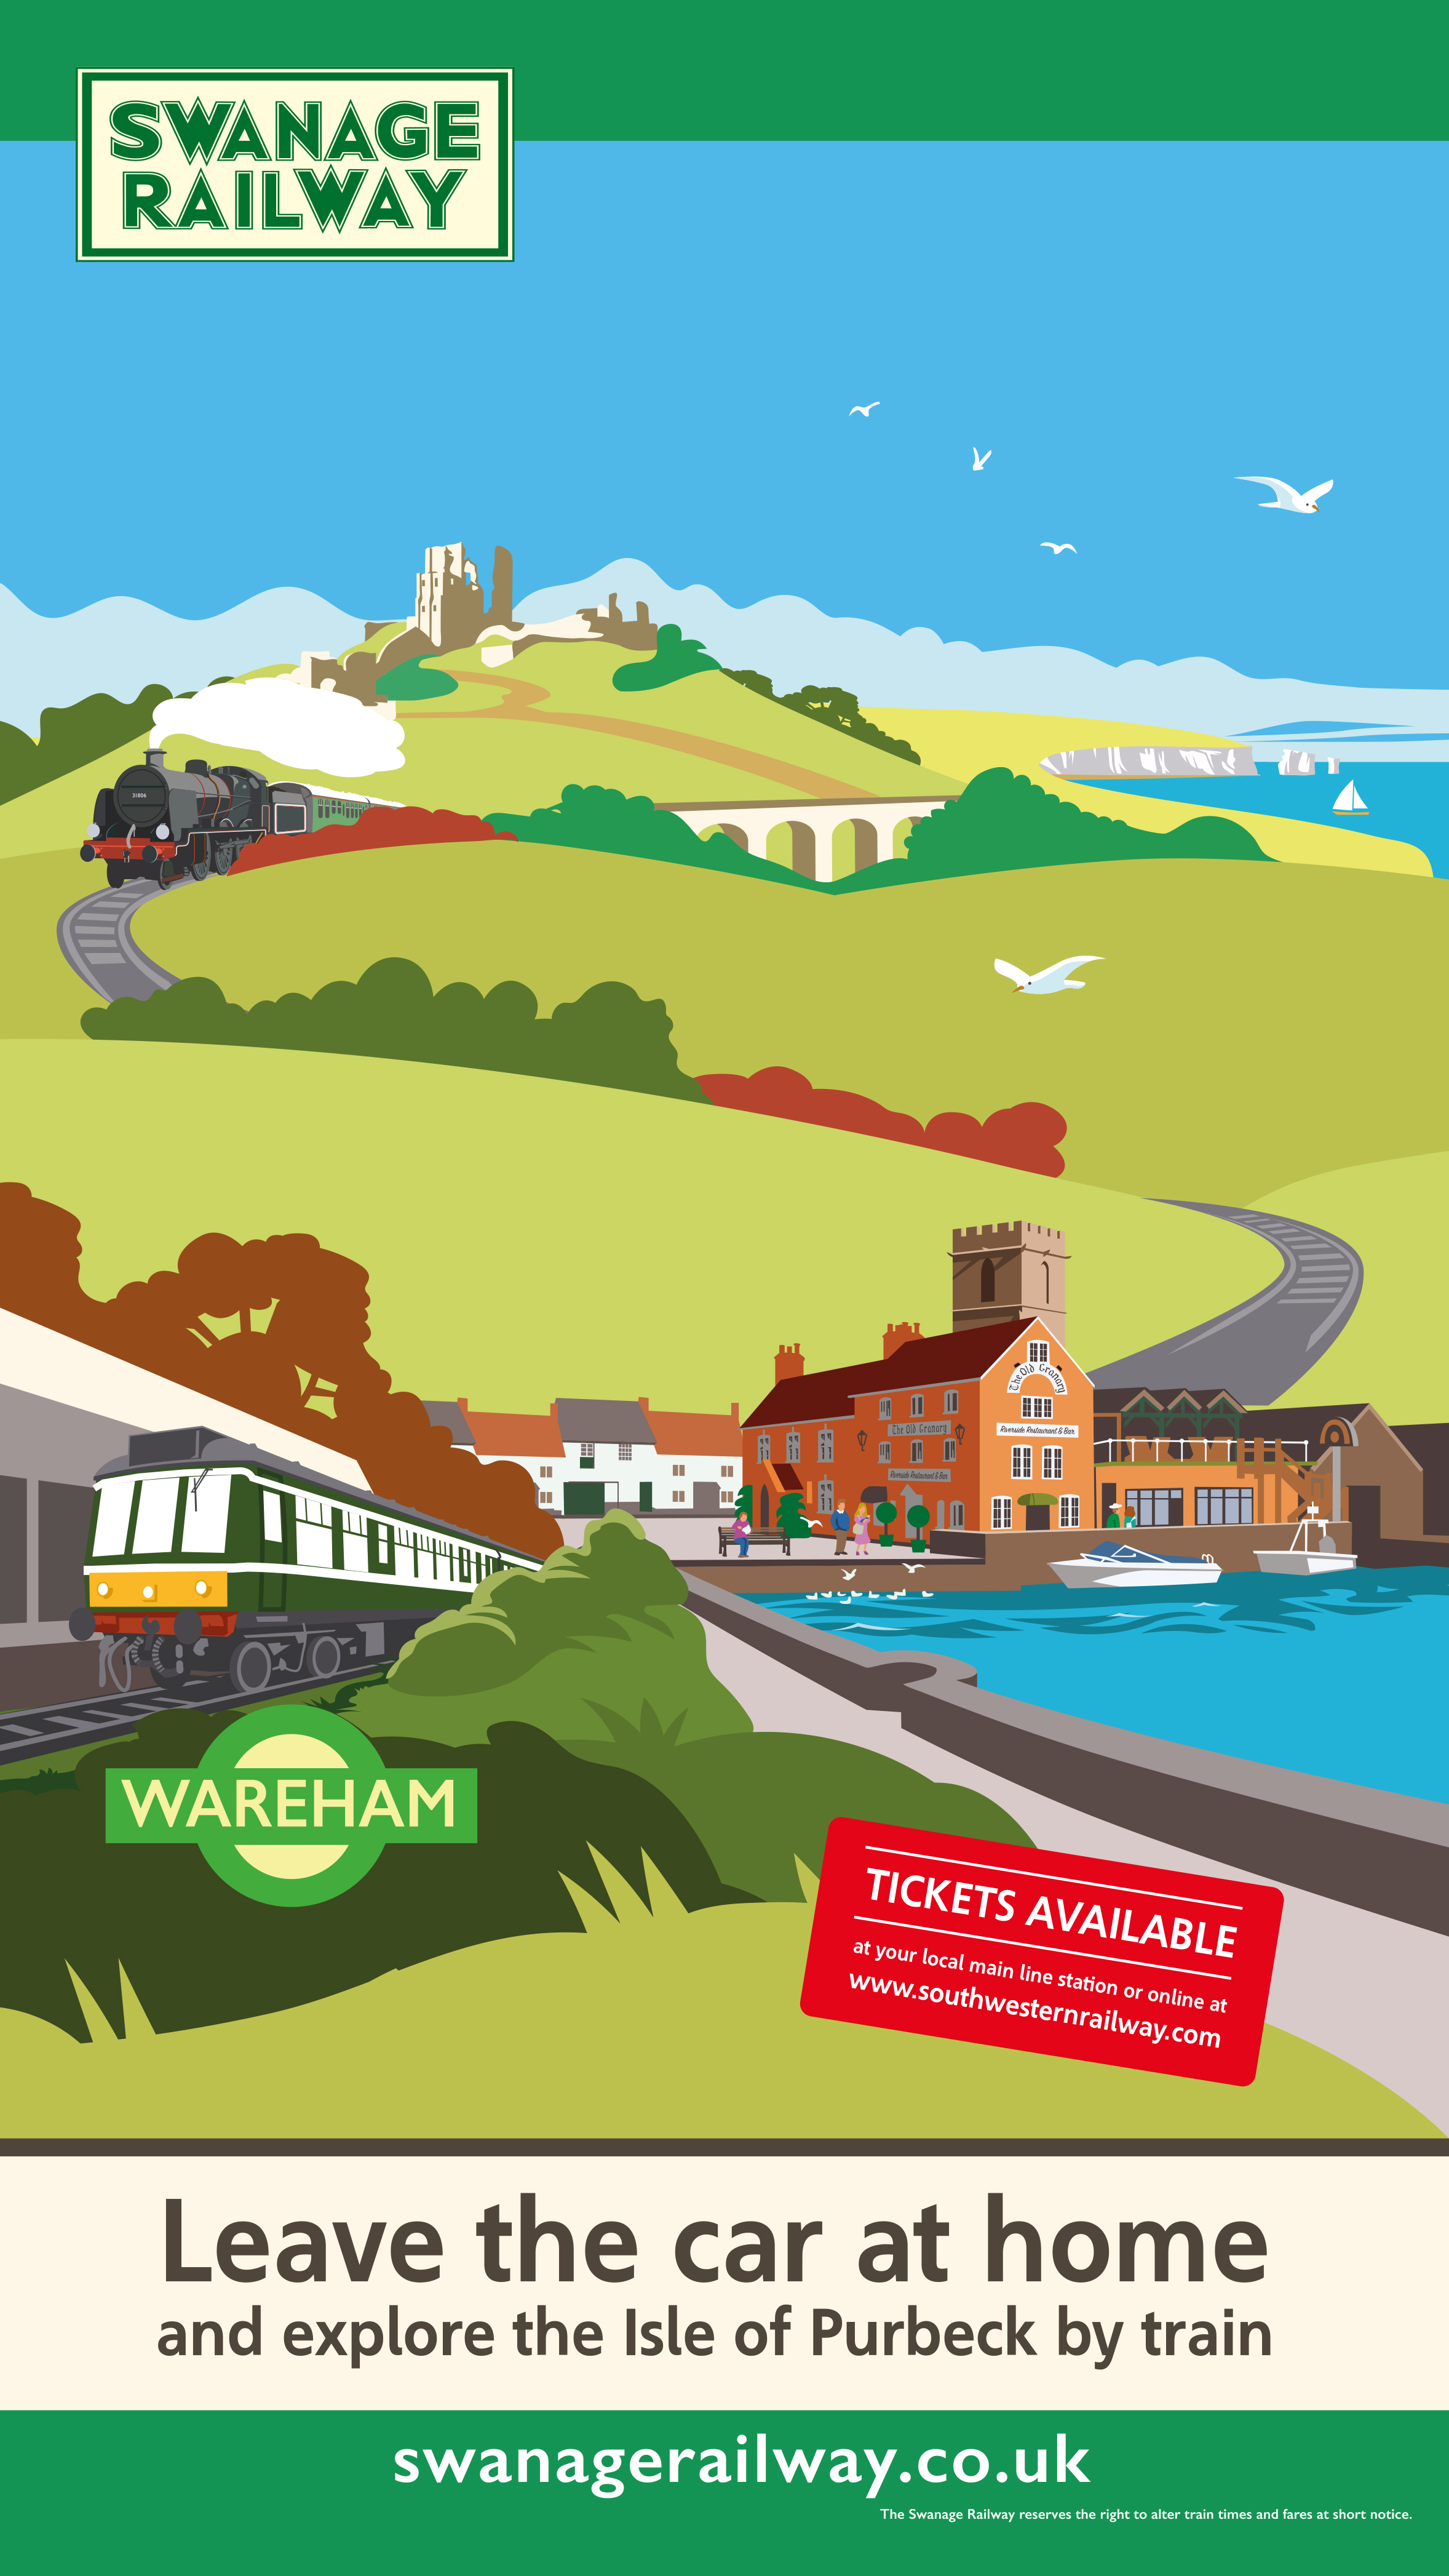 Leave the car at home and explore the Island of Purbeck by train - South Western Railway